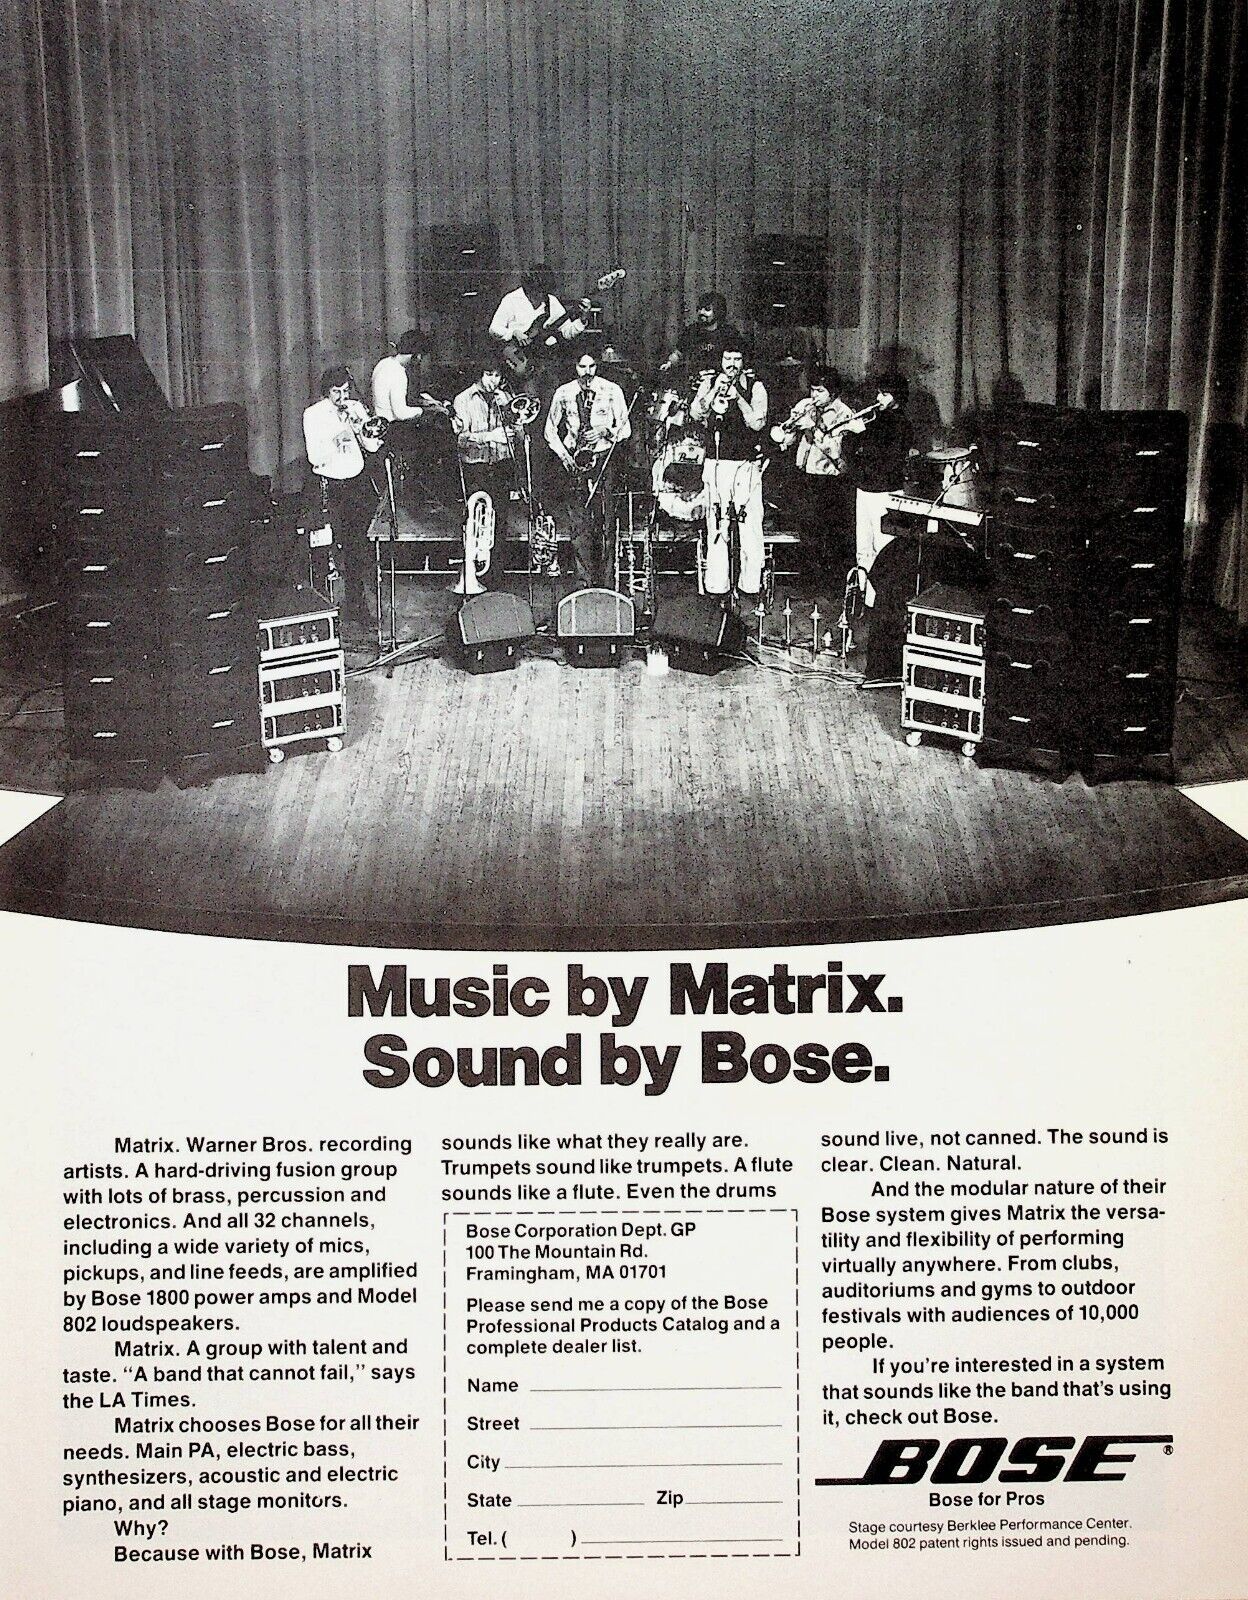 1979 Matrix Fusion Music Group Sound by Bose - Vintage Ad